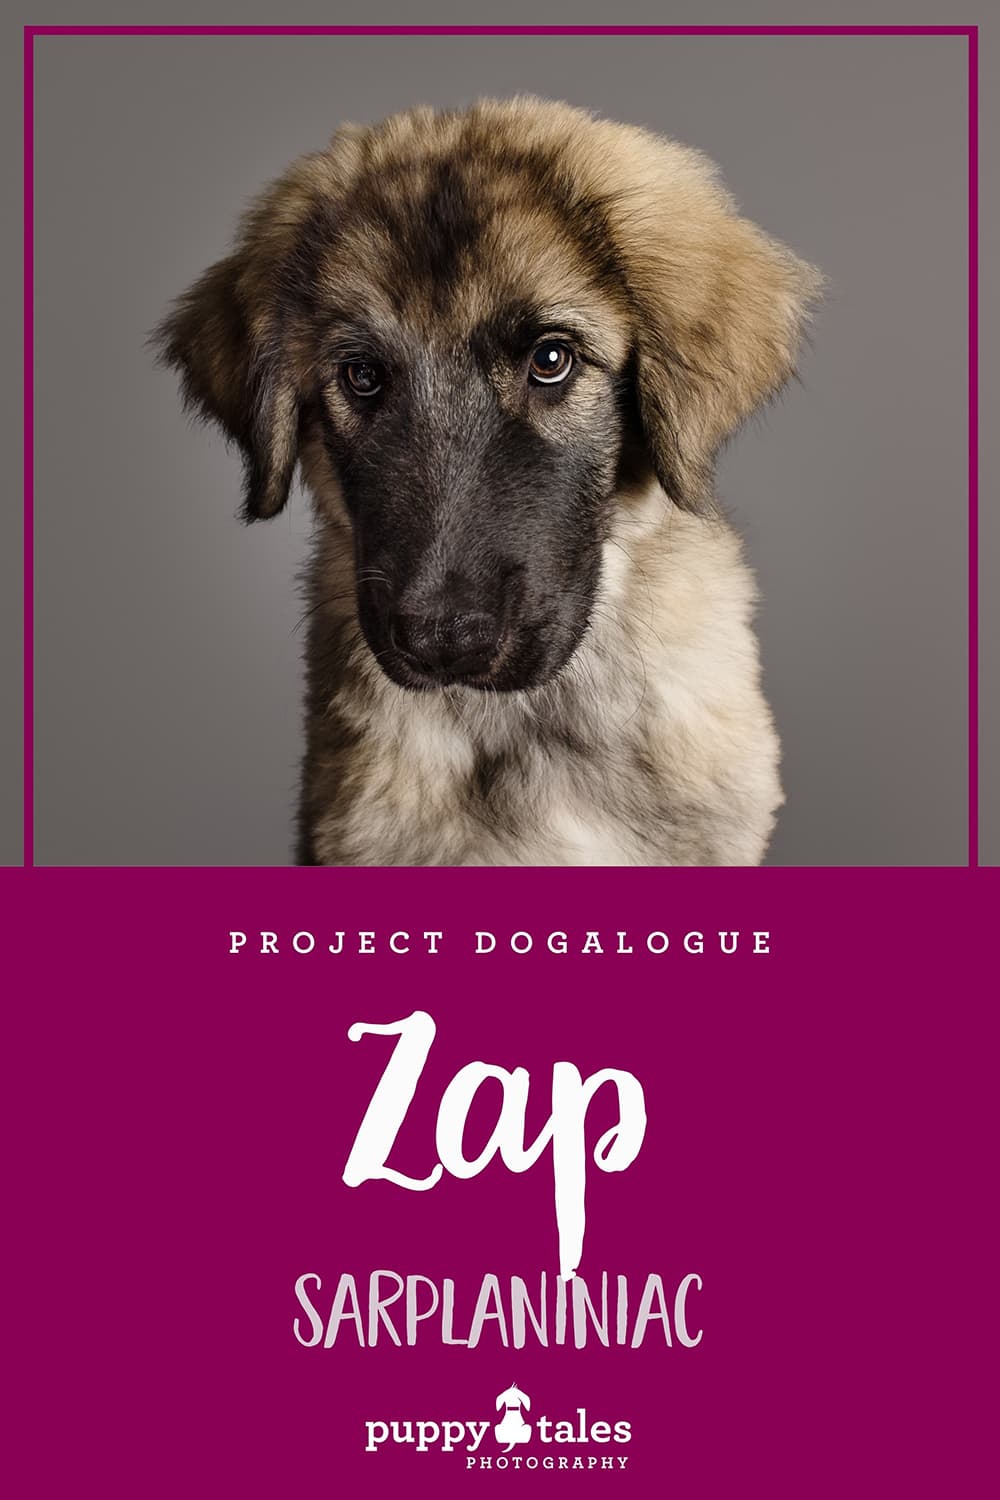 Zap, the Sarplaniniac, photographed by Kerry Martin for Project Dogalogue. Pinterest graphic for his blog post on the Puppy Tales website.